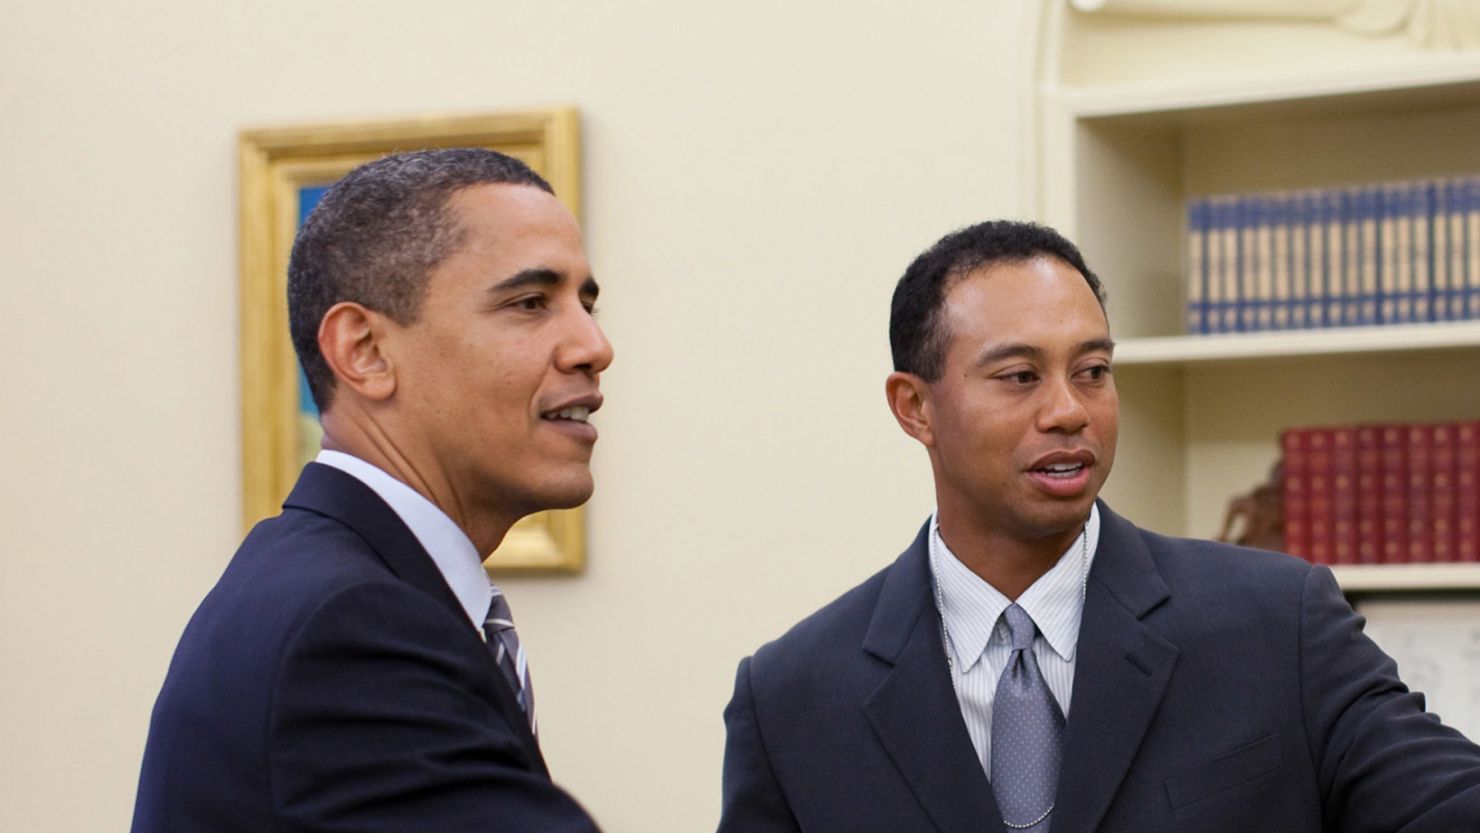 President Obama and Tiger Woods enjoyed a round of golf in Palm Beach, Florida on Sunday.